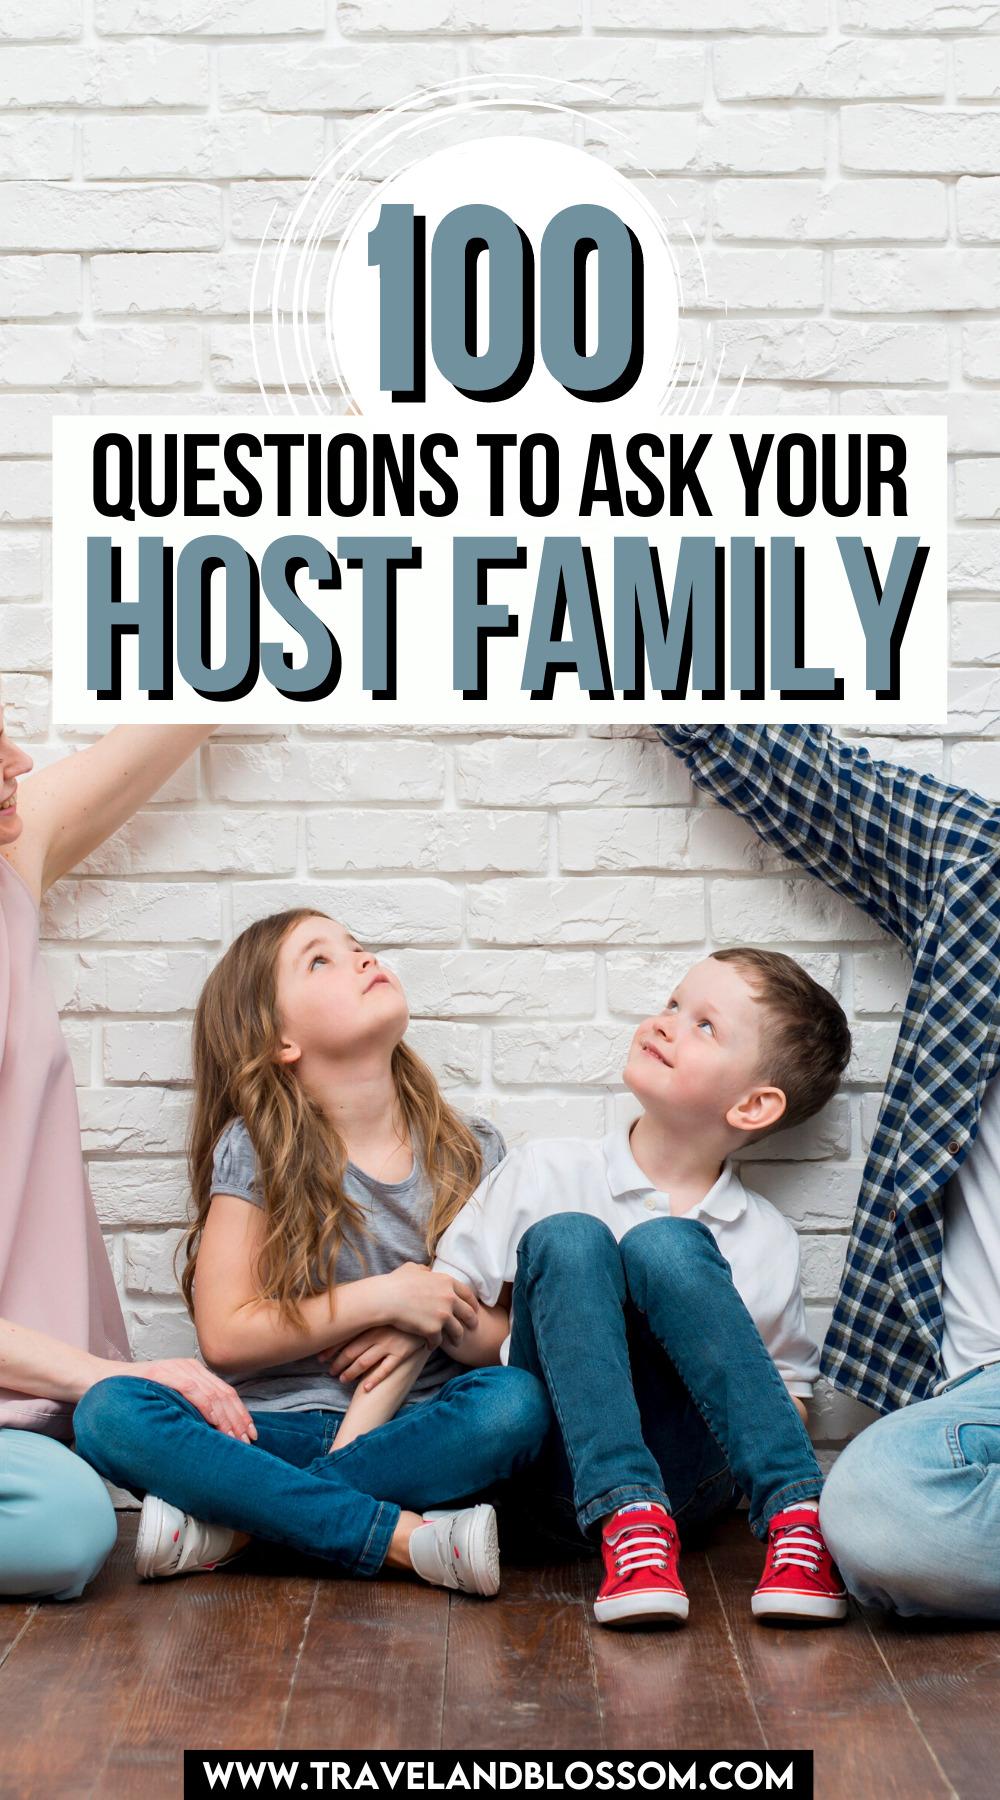 Here are 100 Host Family Interview Questions You Need to Ask